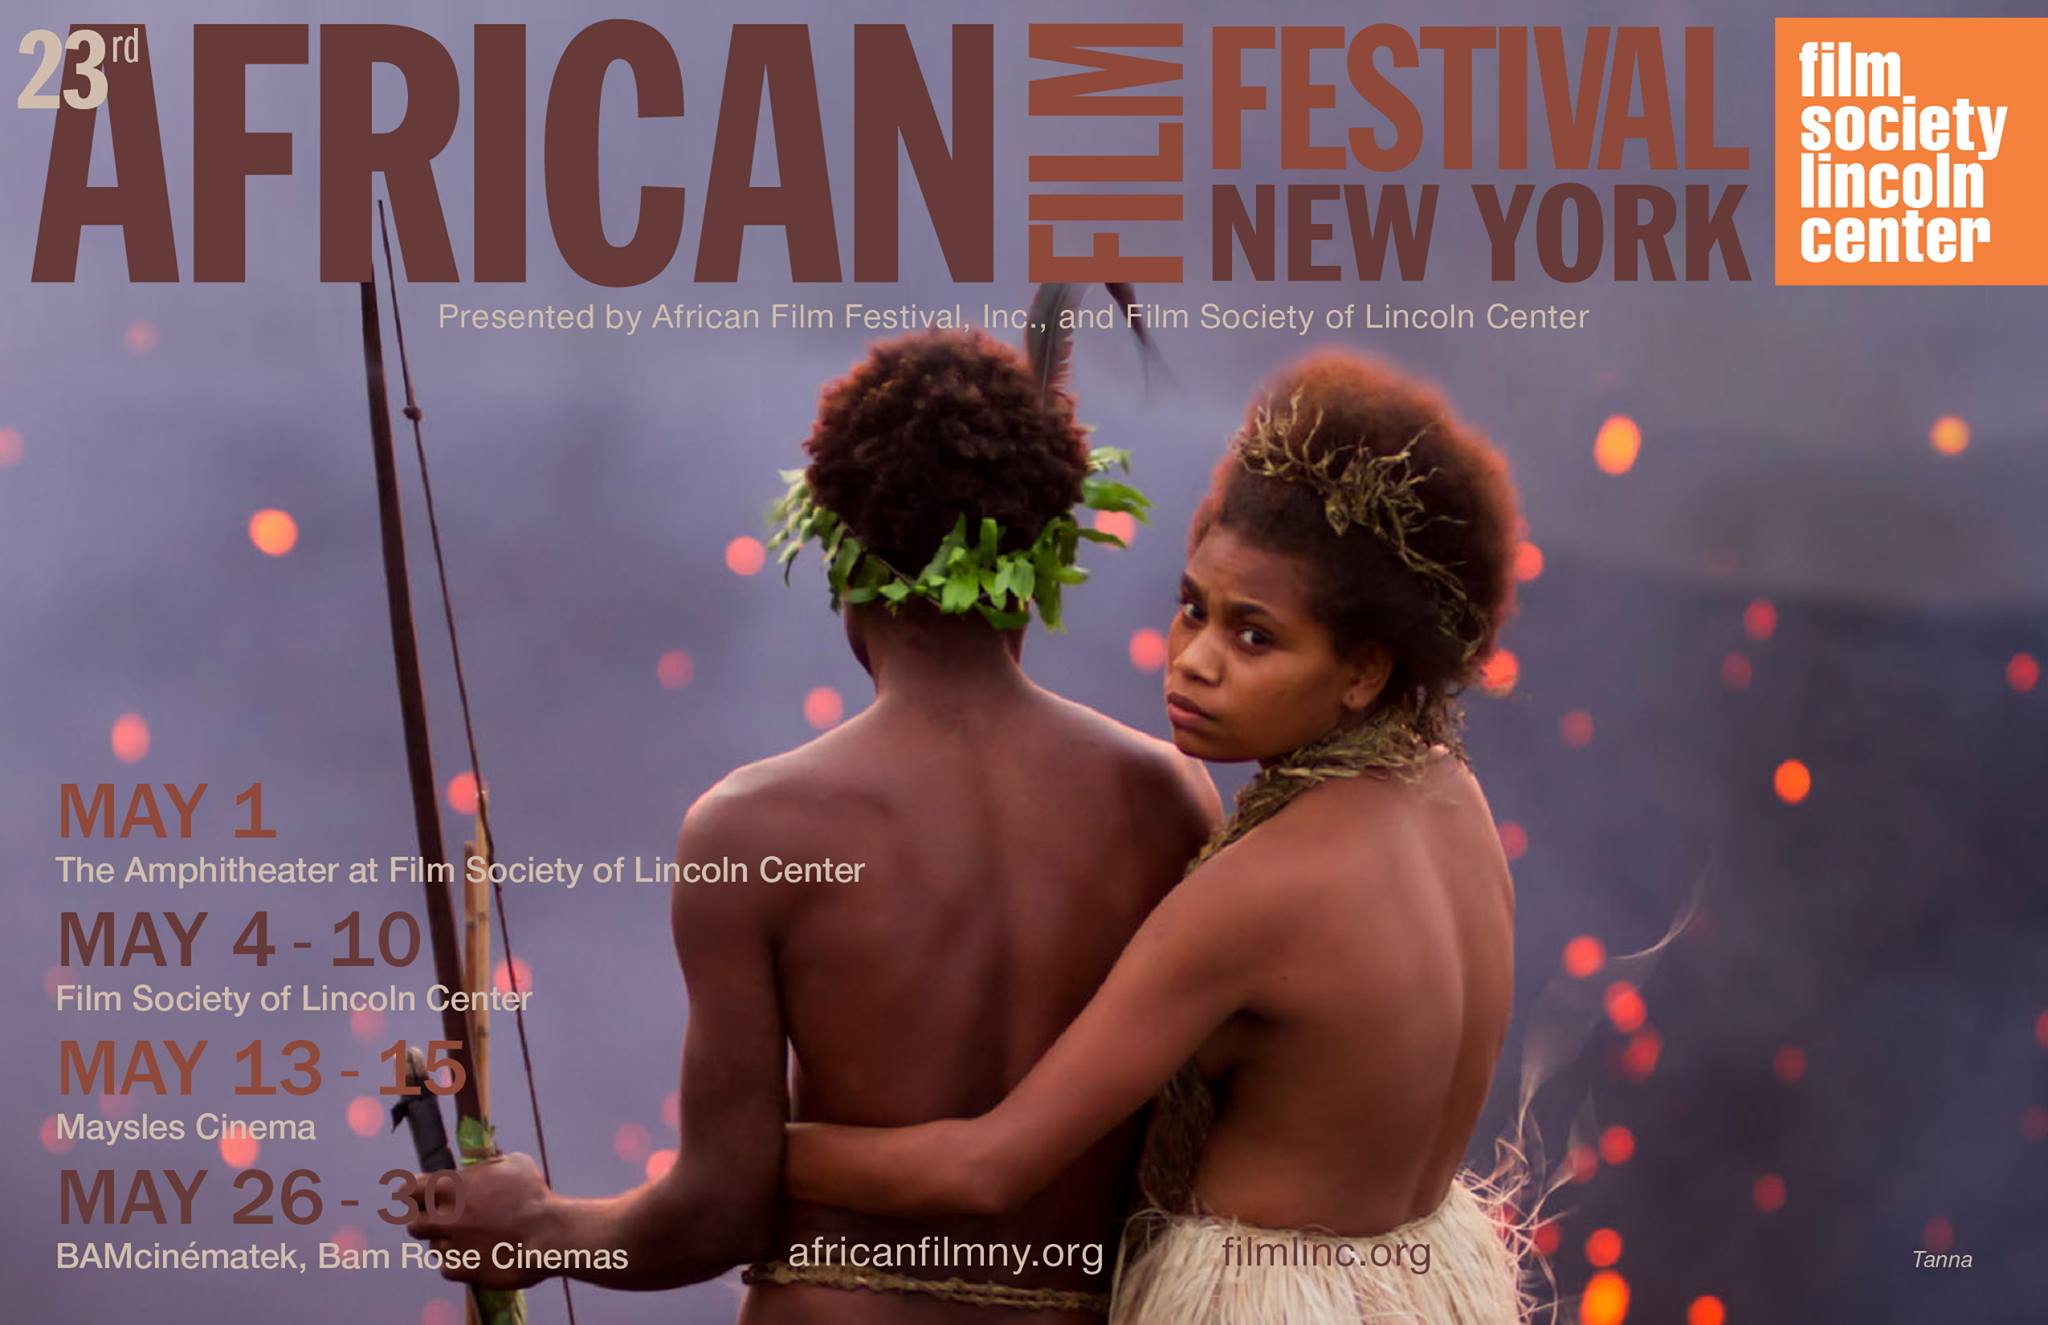 FSLC and African Film Festival, Inc. Announce Lineup for 23rd New York